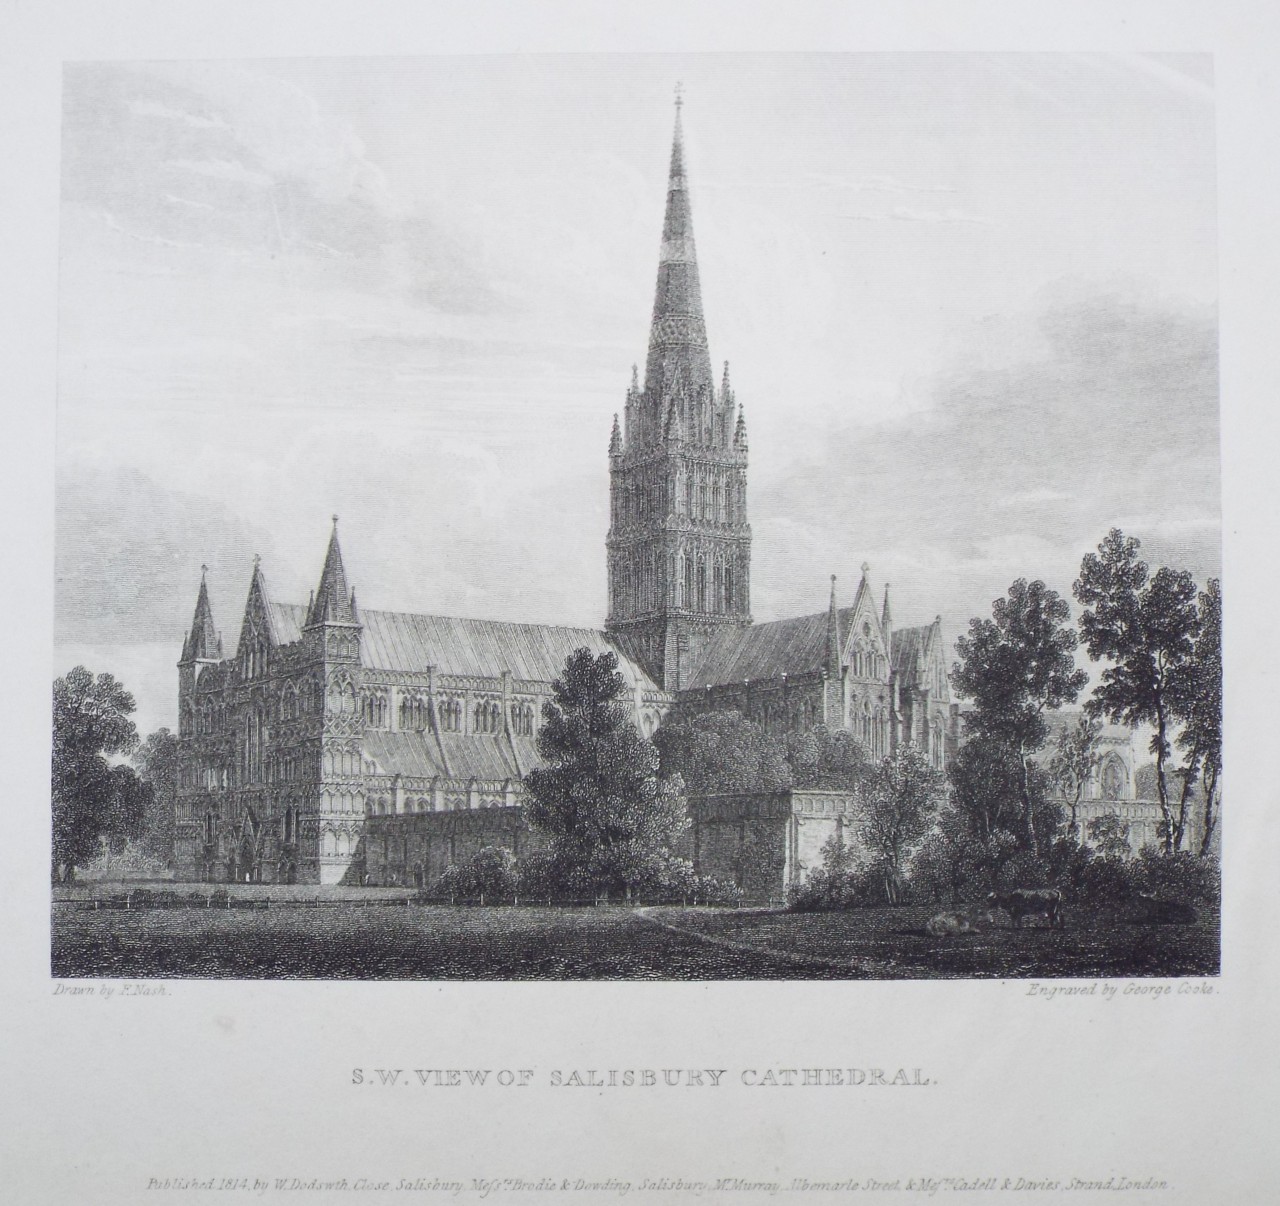 Print - S.W.View of Salisbury Cathedral - Cooke